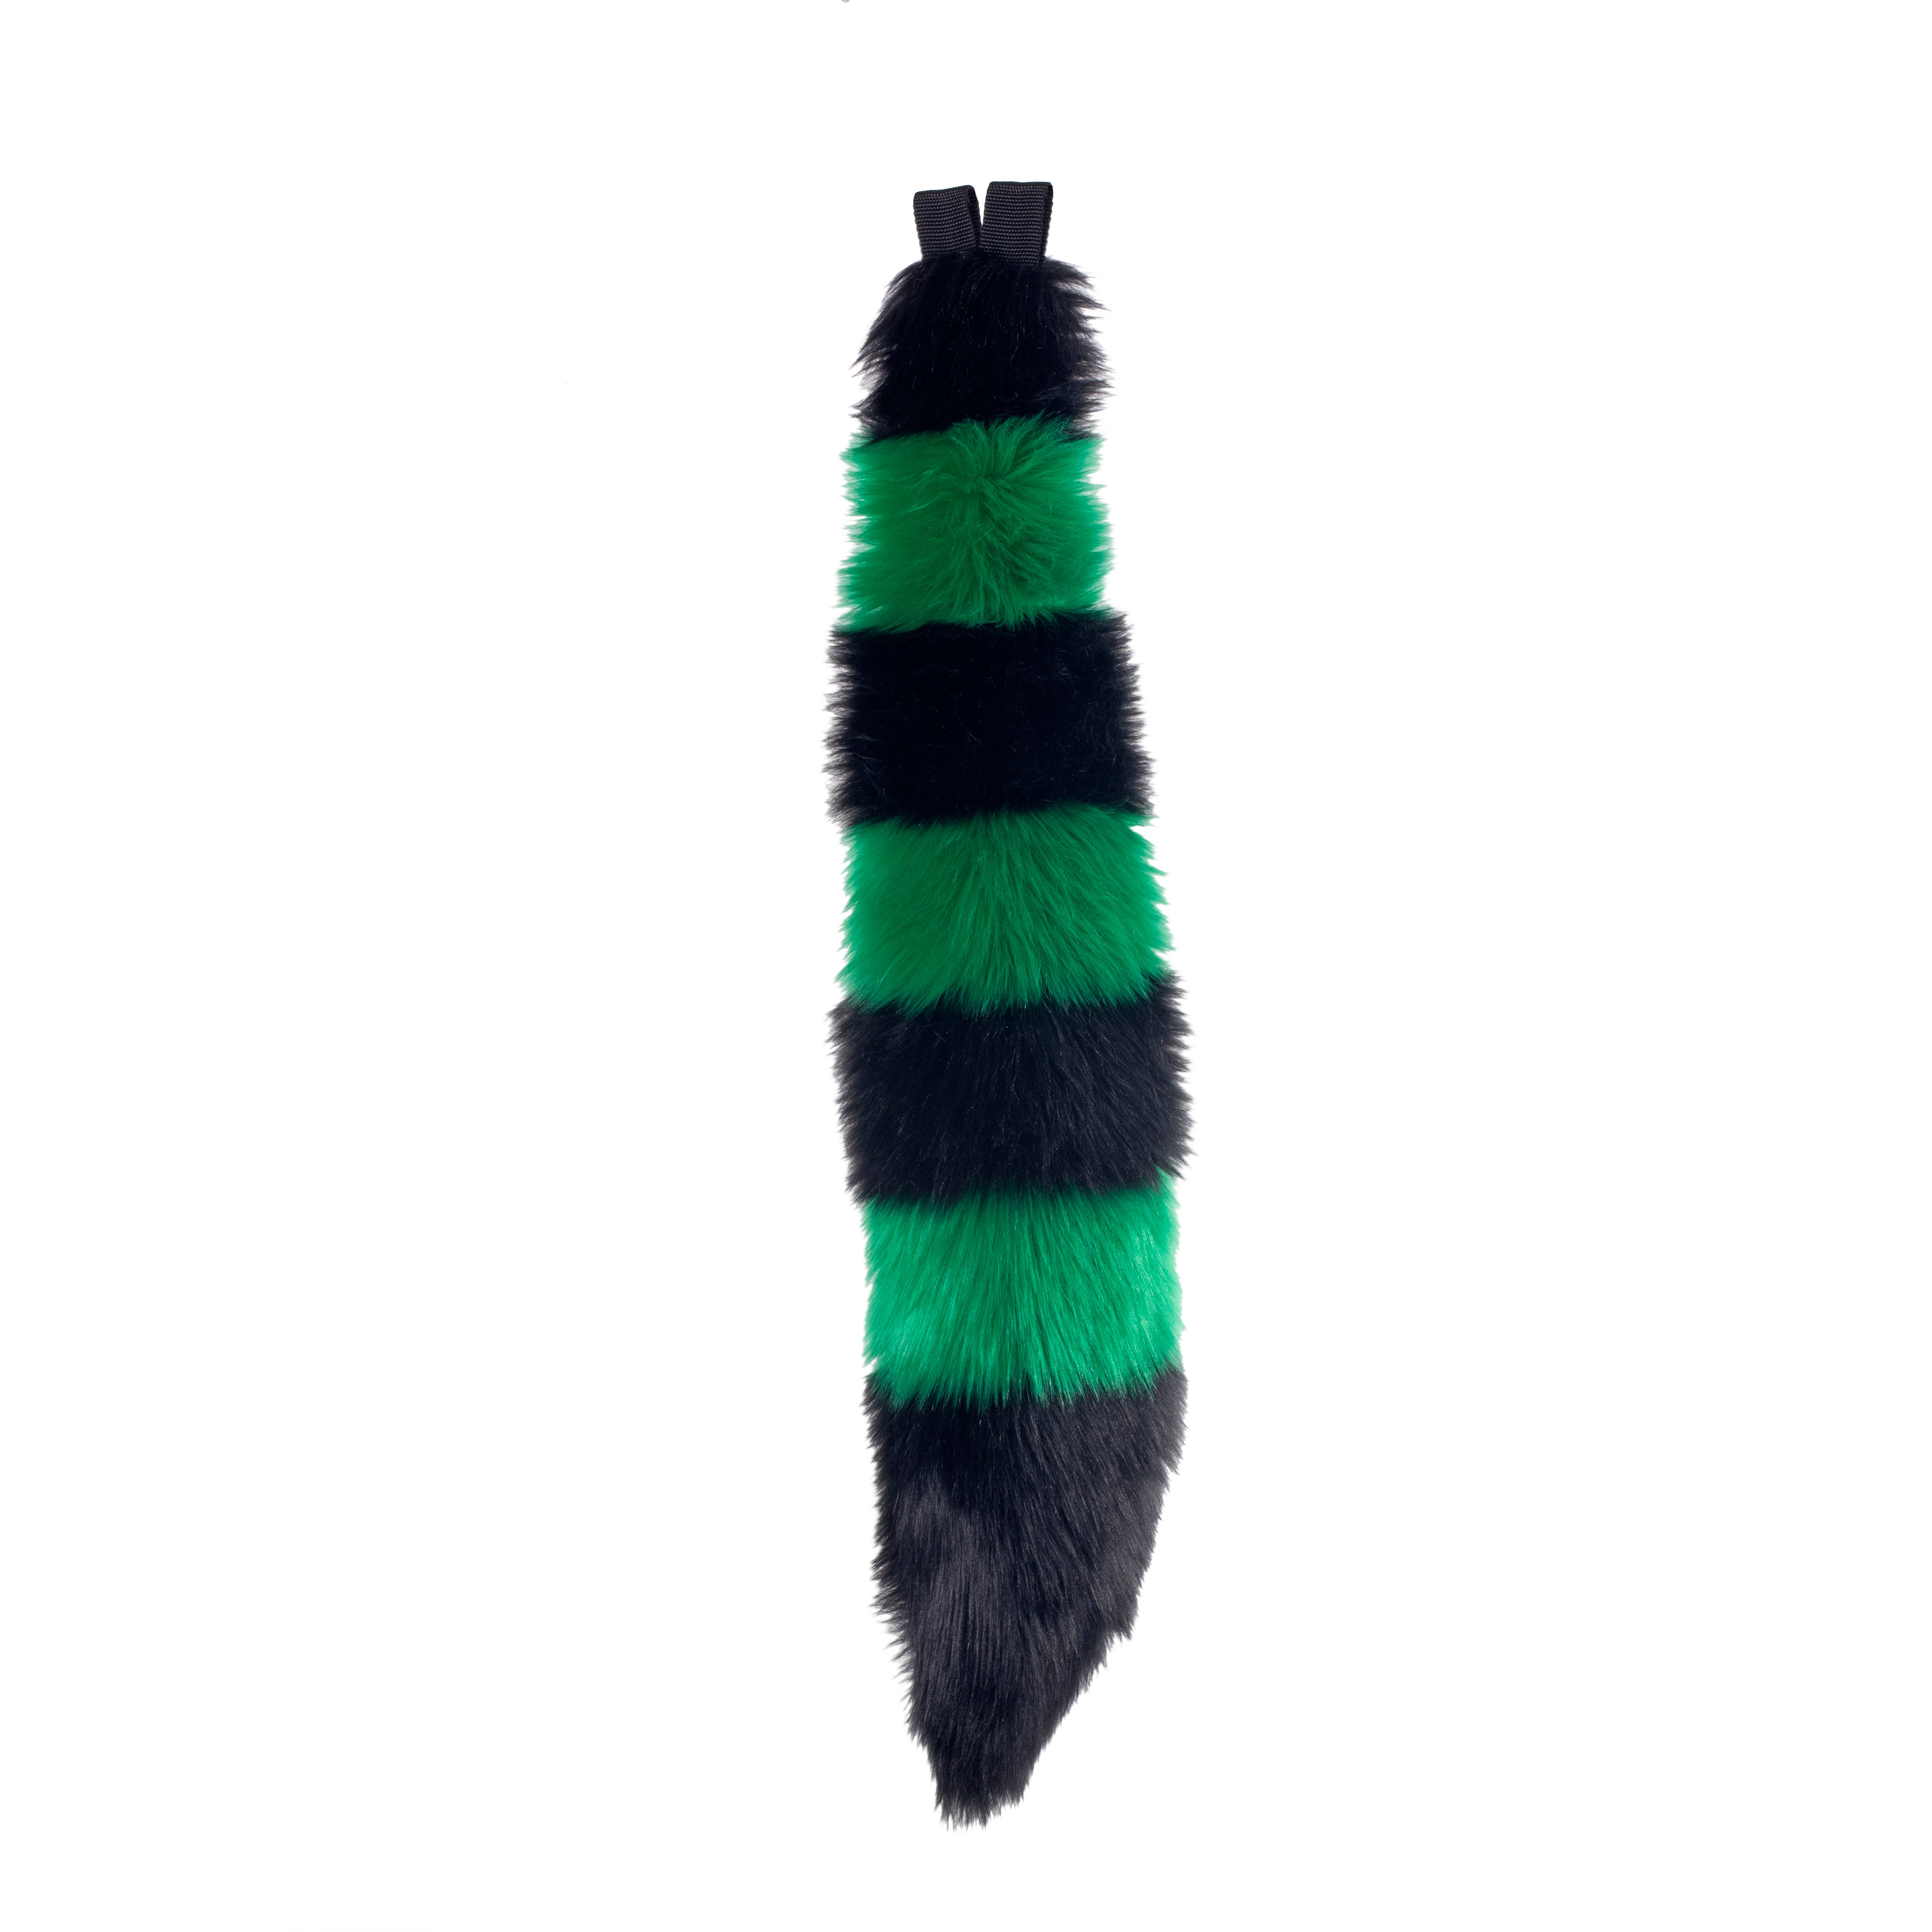 green Pawstar stripey fluffy fox tail. Great for halloween costume and furry cosplay.